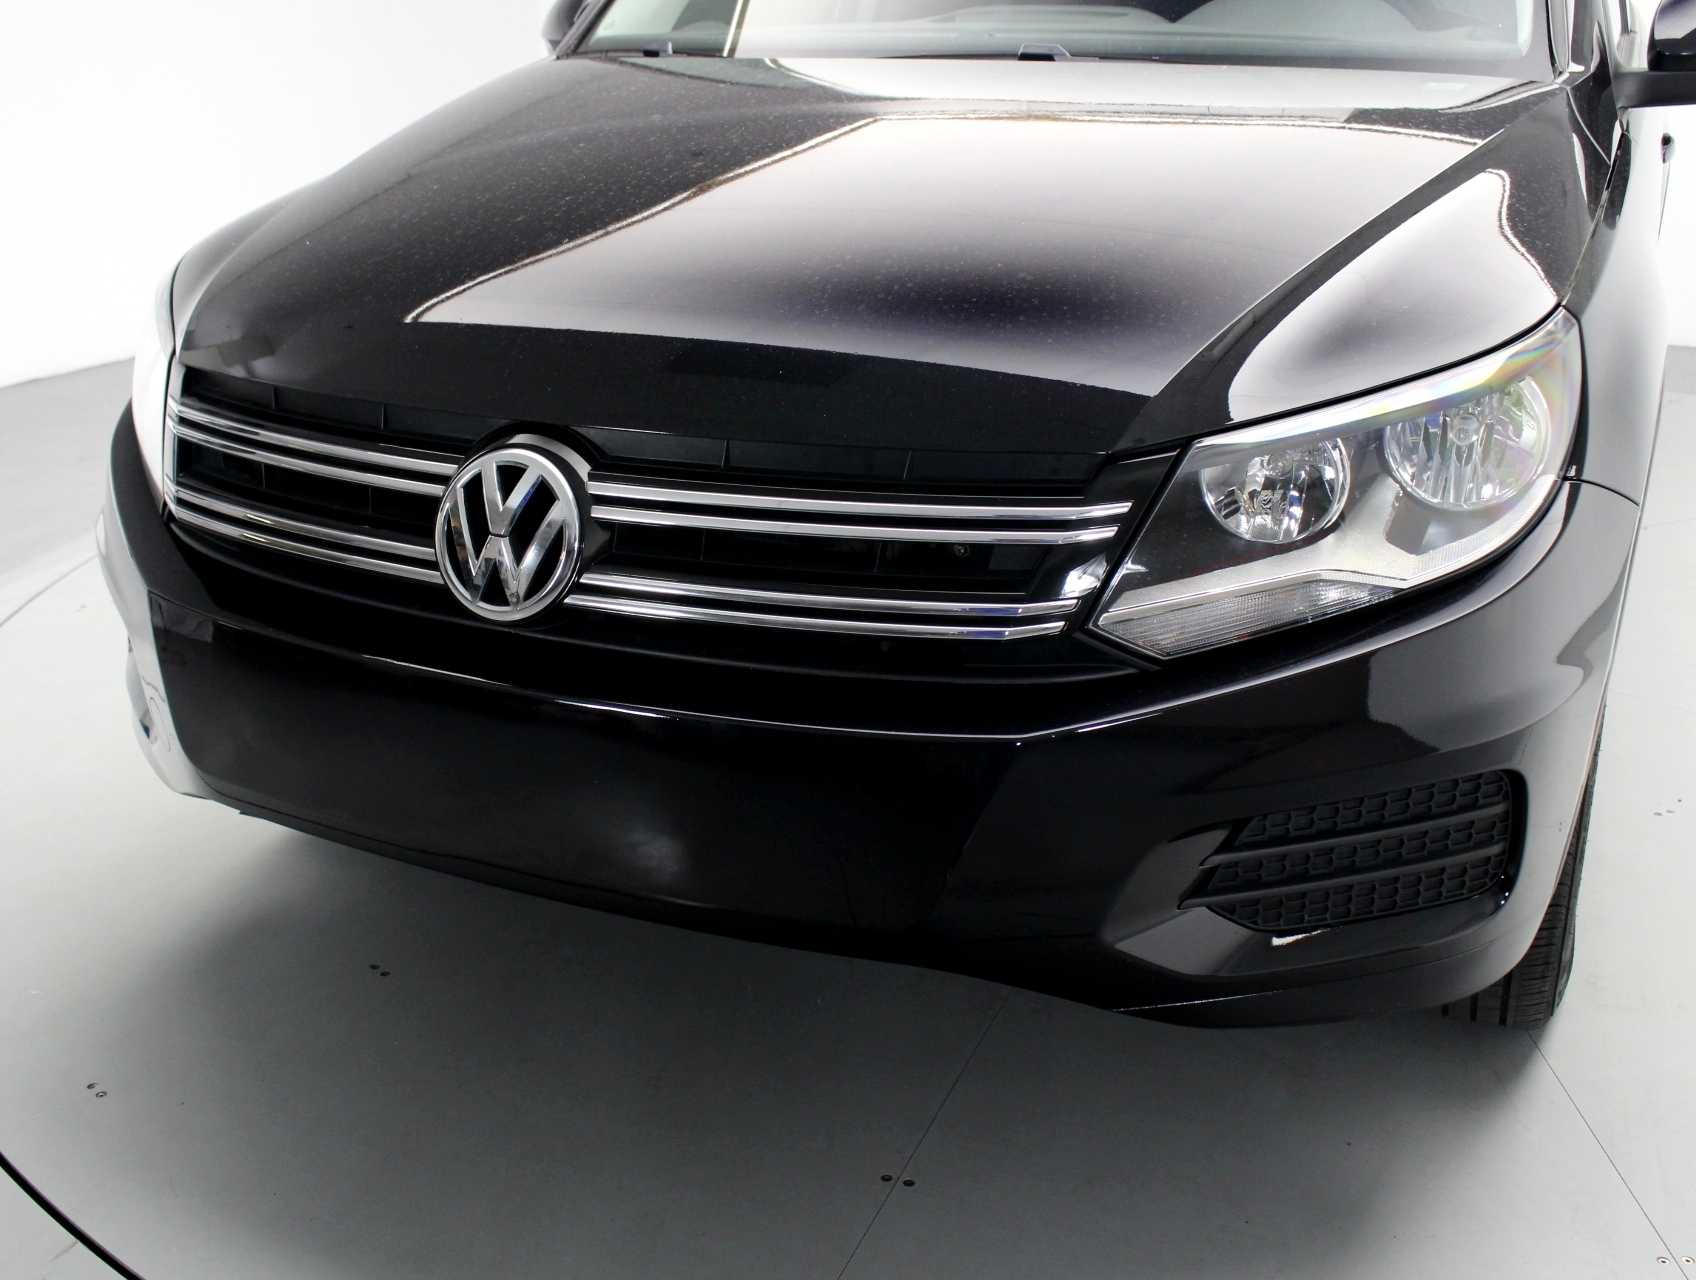 Florida Fine Cars - Used VOLKSWAGEN TIGUAN 2013 WEST PALM S